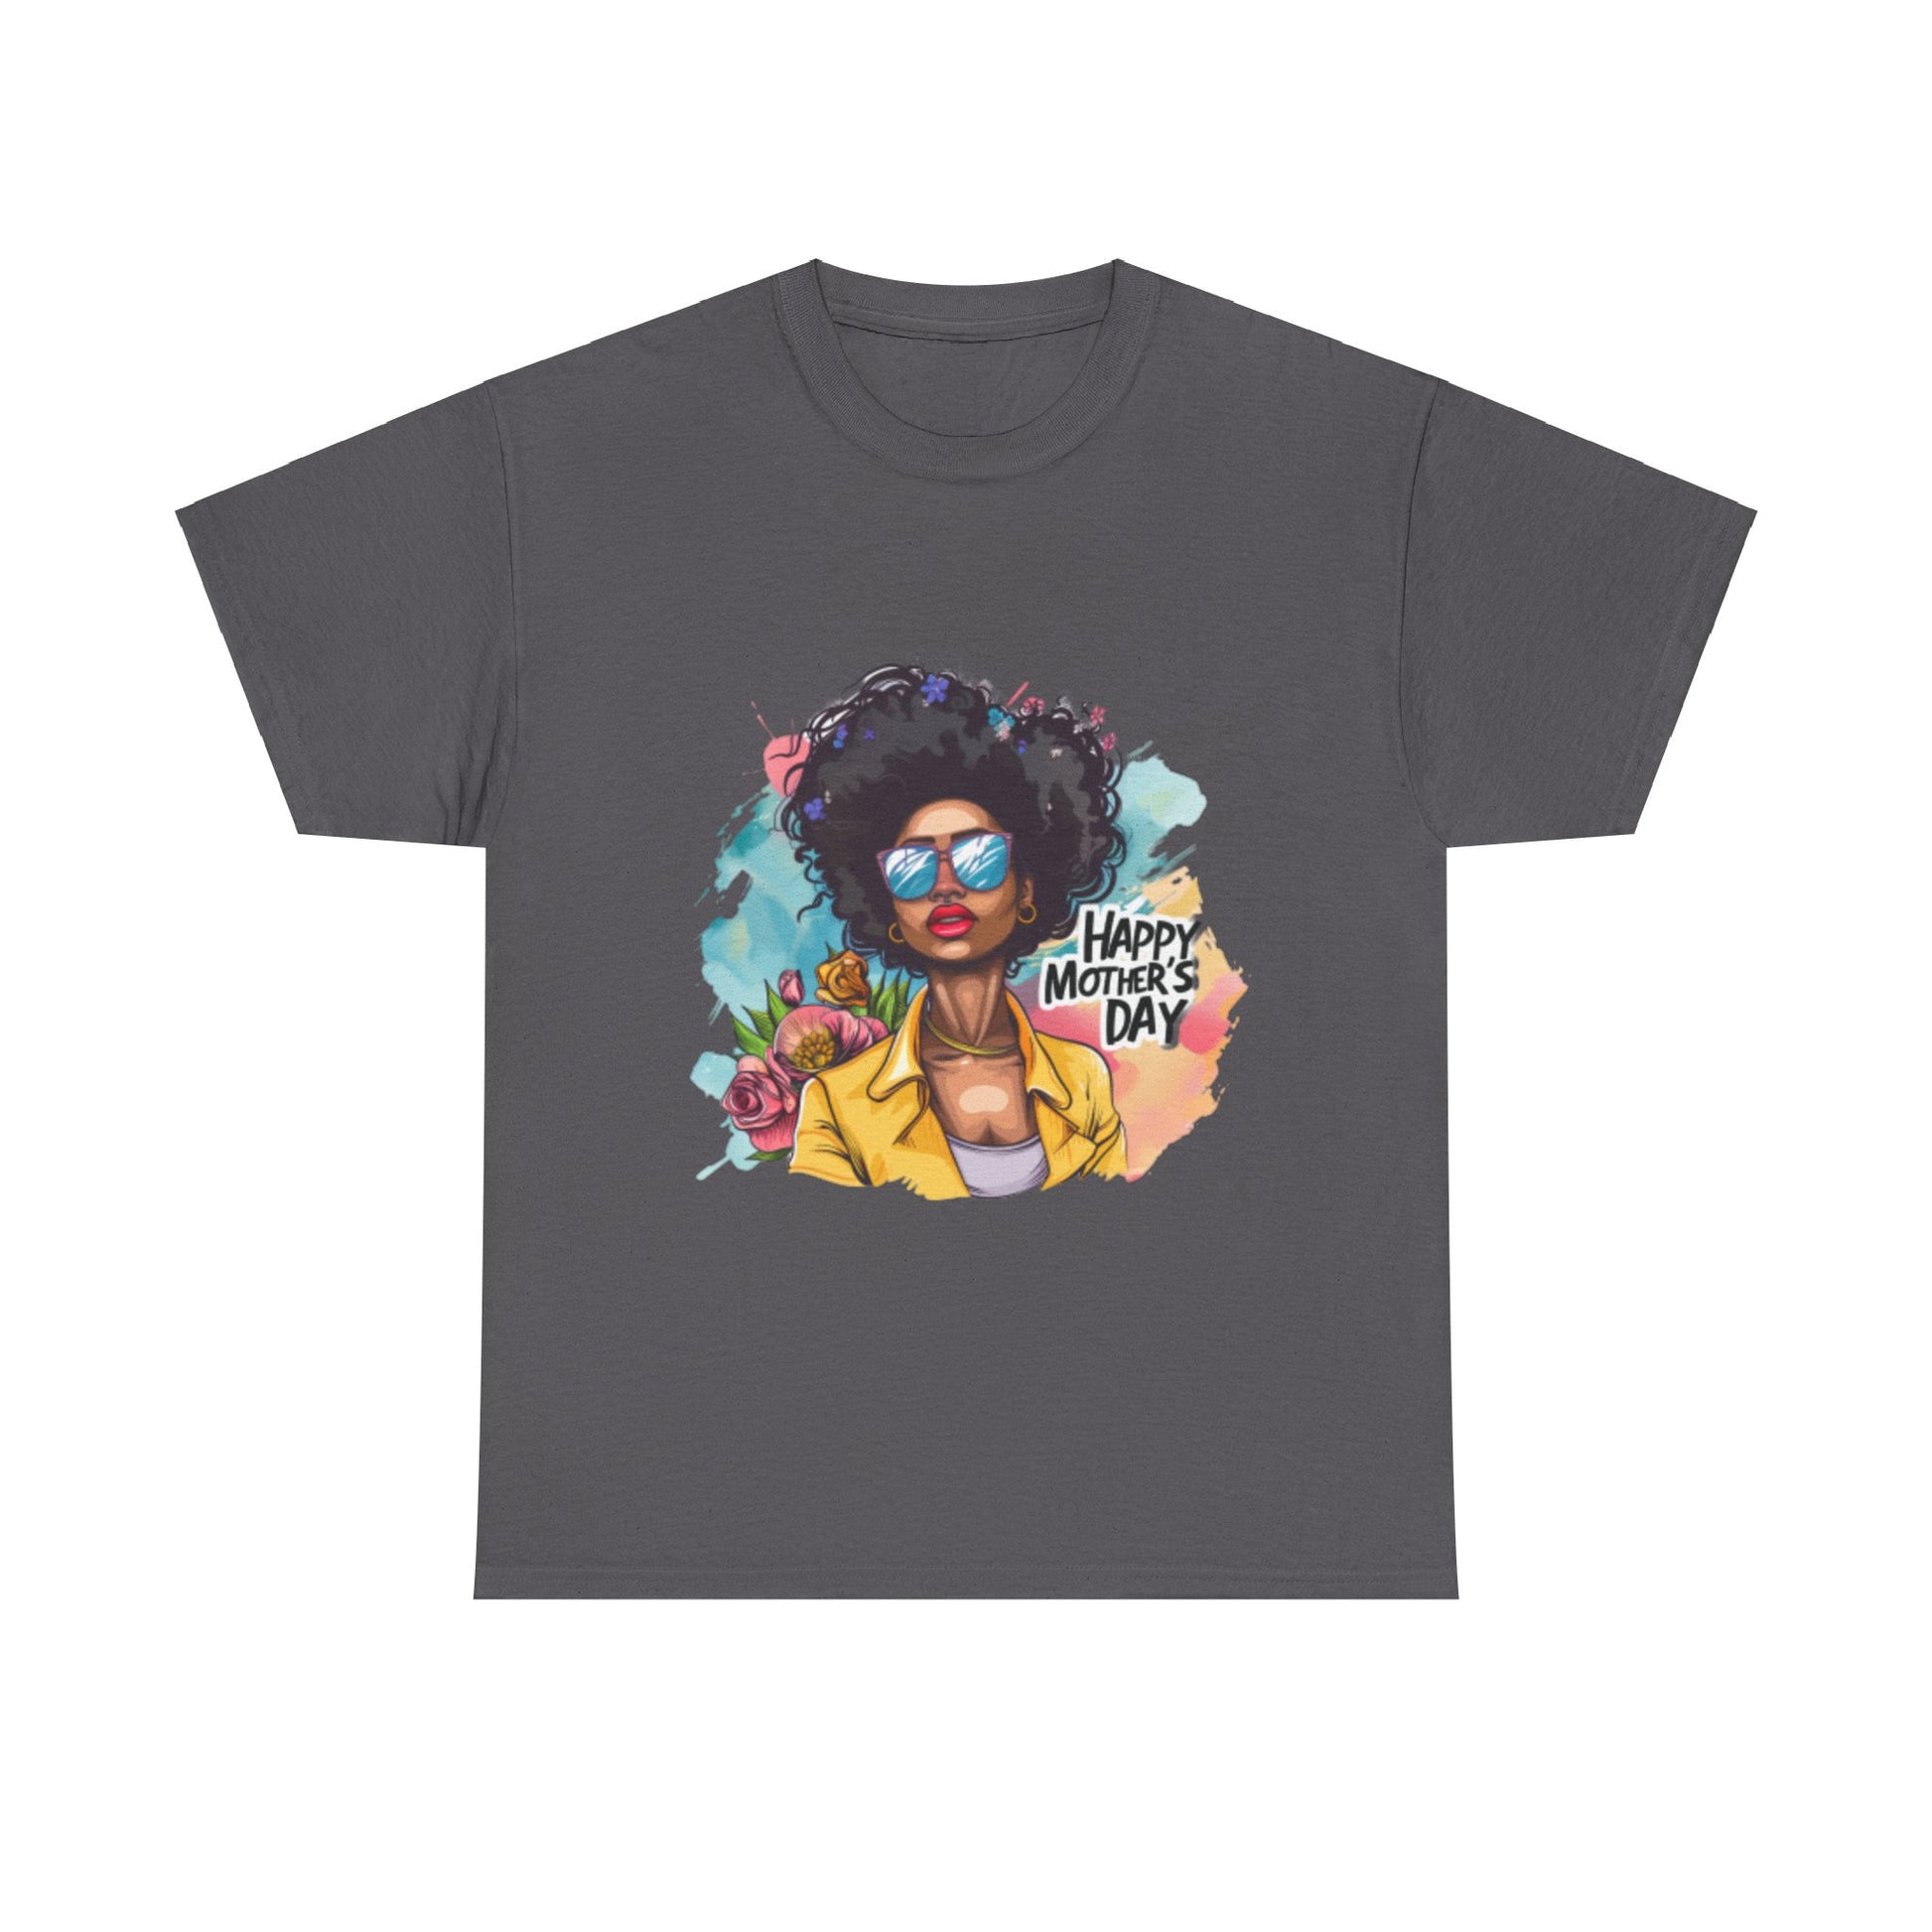 Happy Mother's Day African American Mom Graphic Unisex Heavy Cotton Tee Cotton Funny Humorous Graphic Soft Premium Unisex Men Women Charcoal T-shirt Birthday Gift-2